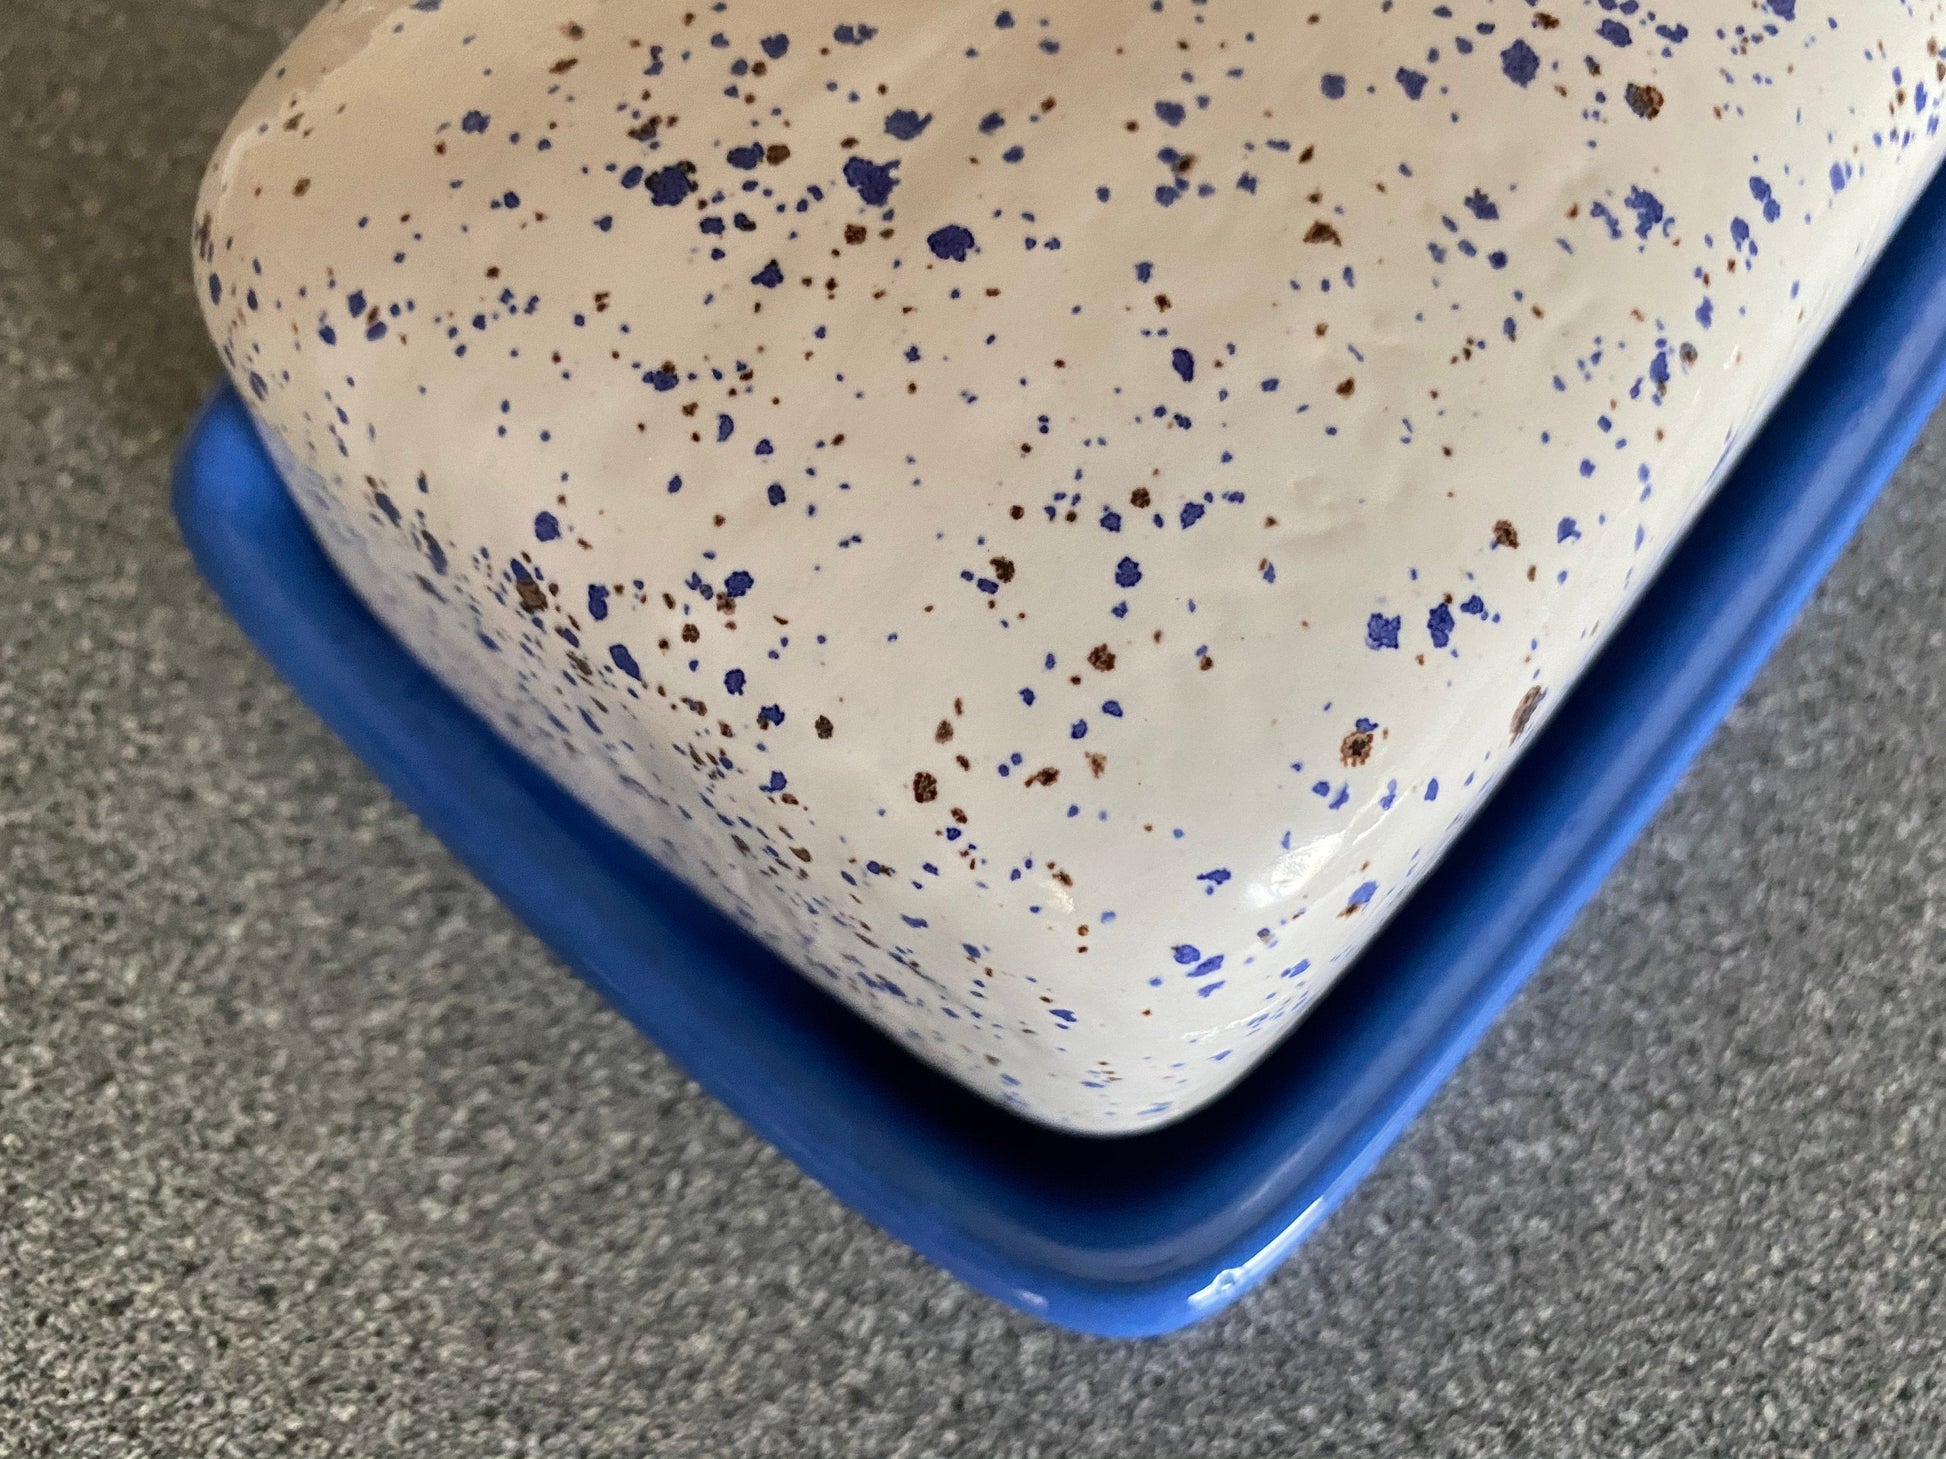 Butter Dish, Speckled Blue with Airforce Blue Dish - PeterBowenArt